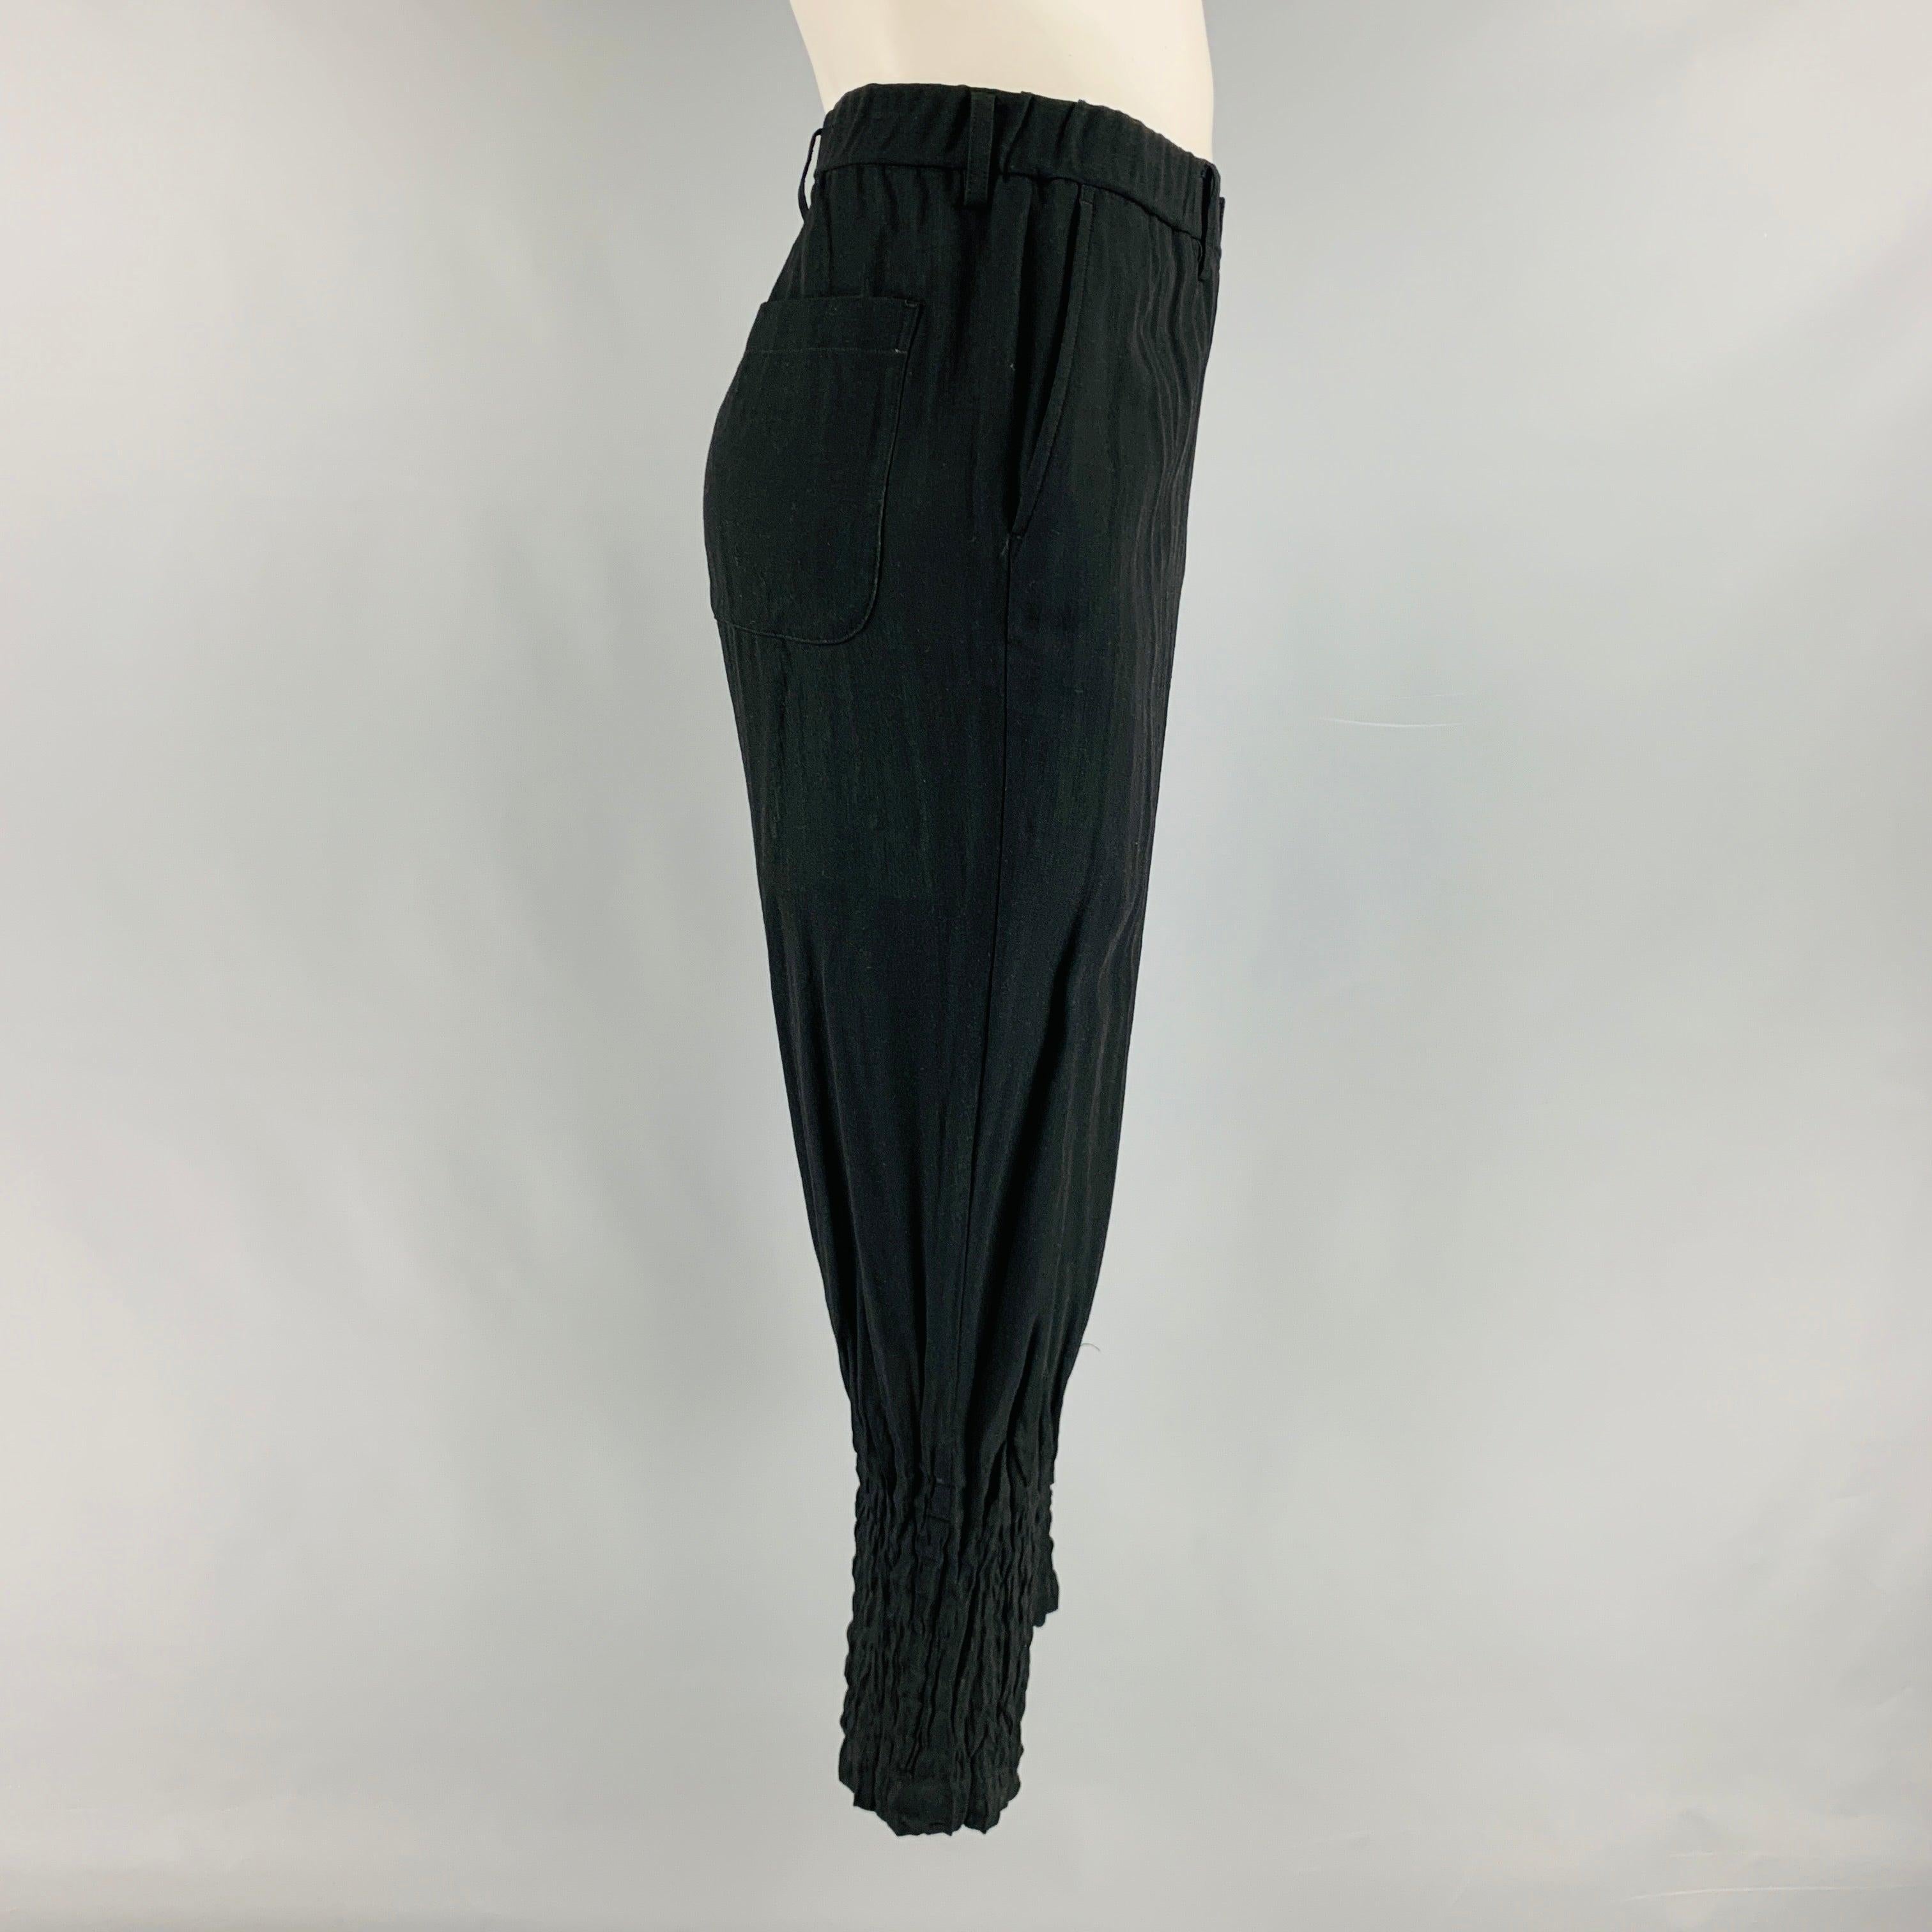 ISSEY MIYAKE casual pants comes in a black woven with a green in lining featuring a tapered ankle, straight leg, slit pockets, elastic at waistband, and a zip fly closure. Made in Japan.Excellent Pre-Owned Condition.  

Marked:   3 

Measurements: 
